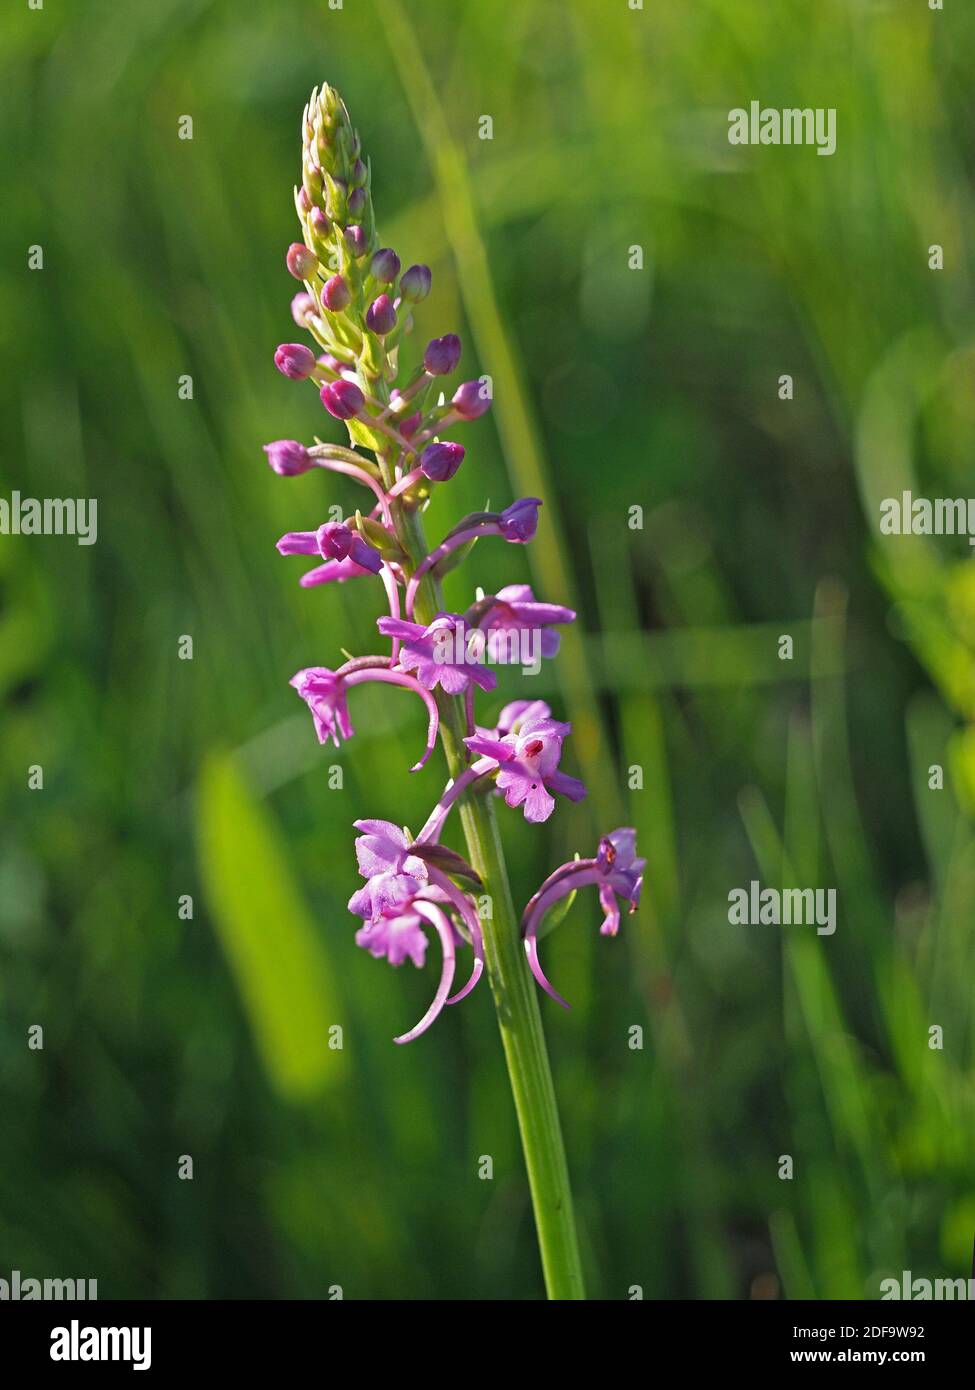 mass of pink flowers with long spurs on tall flowerspike of Fragrant Orchid (Gymnadenia conopsea) at Cumbria Wildlife Trust Reserve, England UK Stock Photo